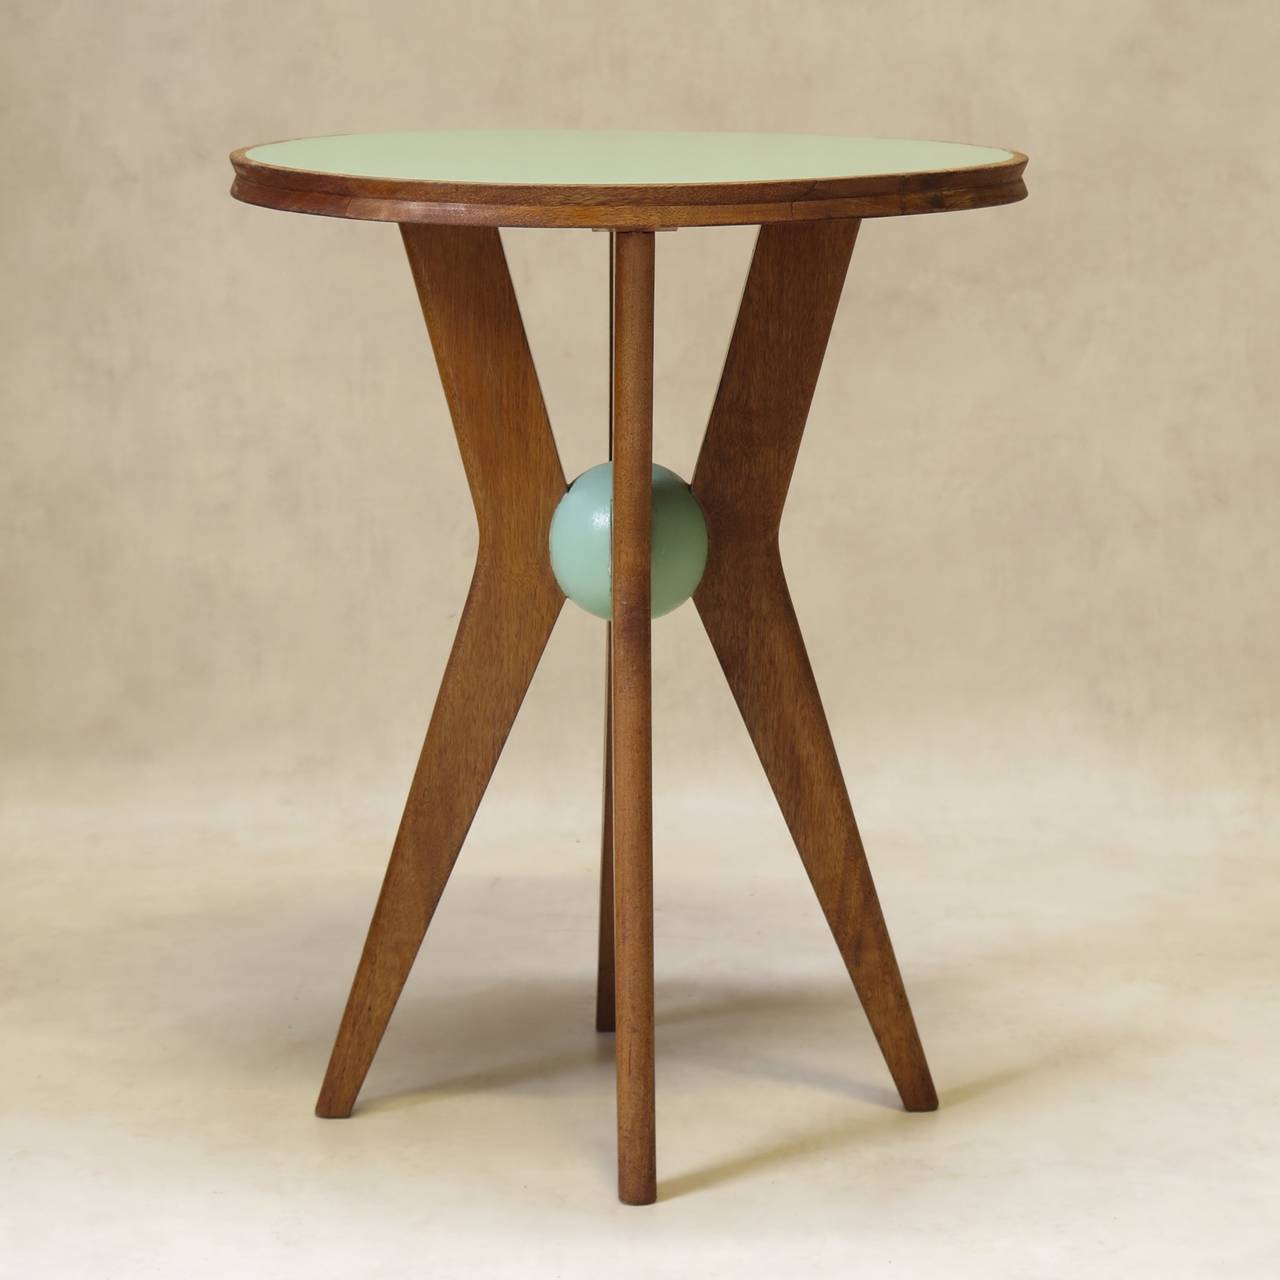 Fantastic pair of oak side tables with X-shaped bases, joined in the center by a light green sphere. The table top is also painted light green.

Very well made. Beautiful detail, and great design.